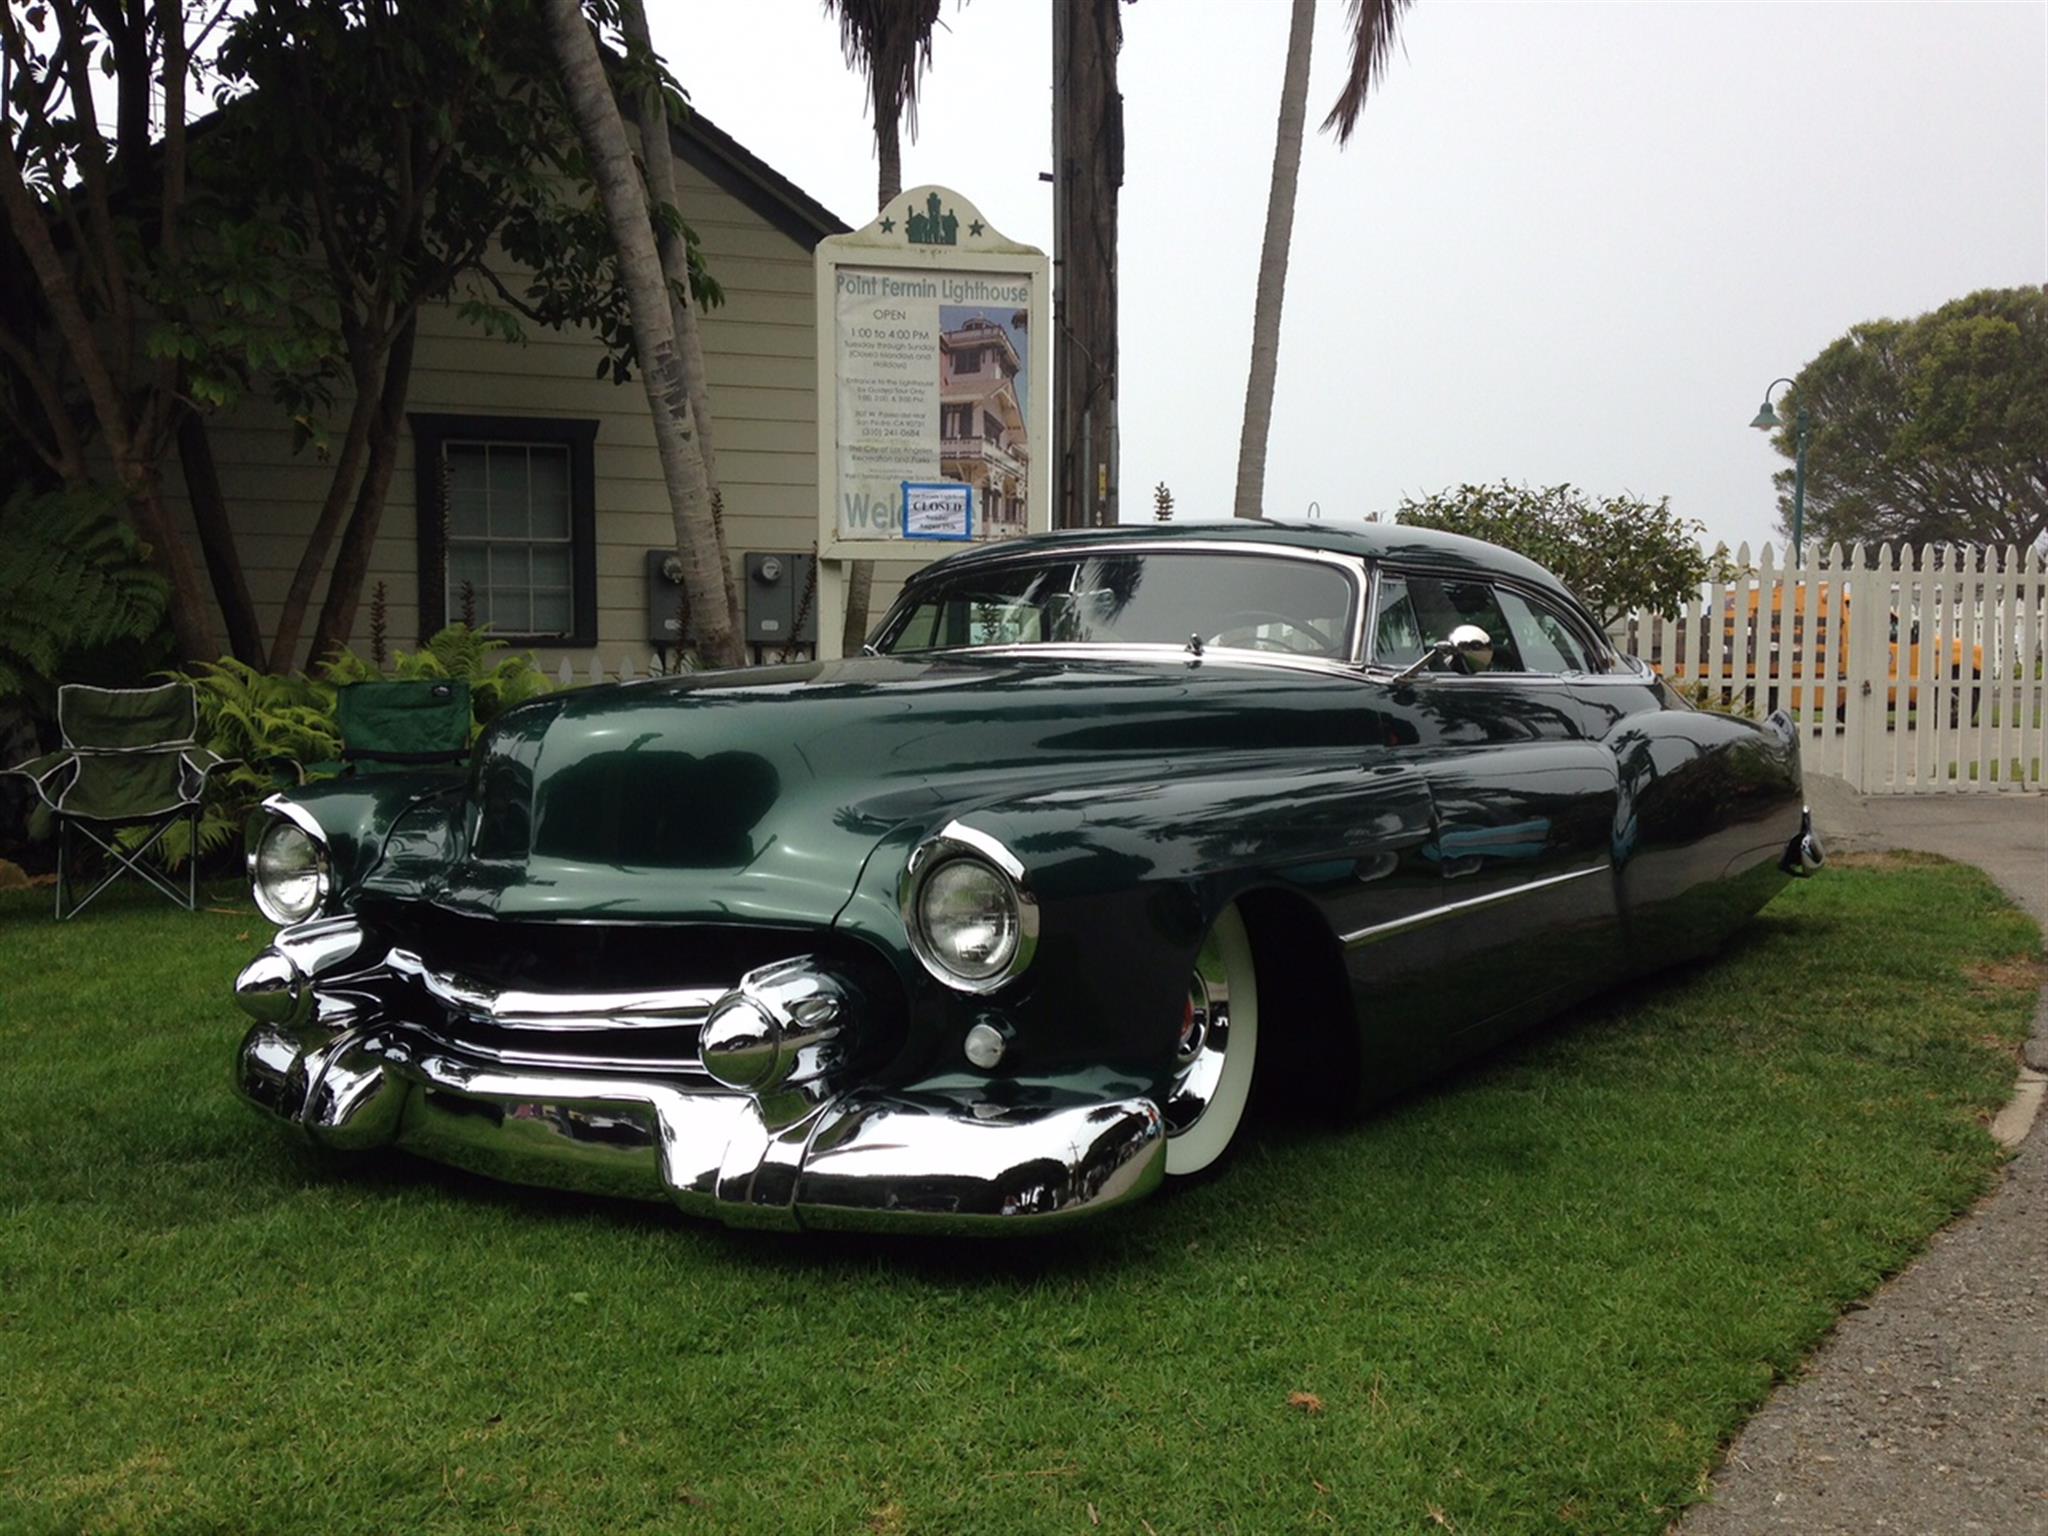 1953 Cadillac grille. 